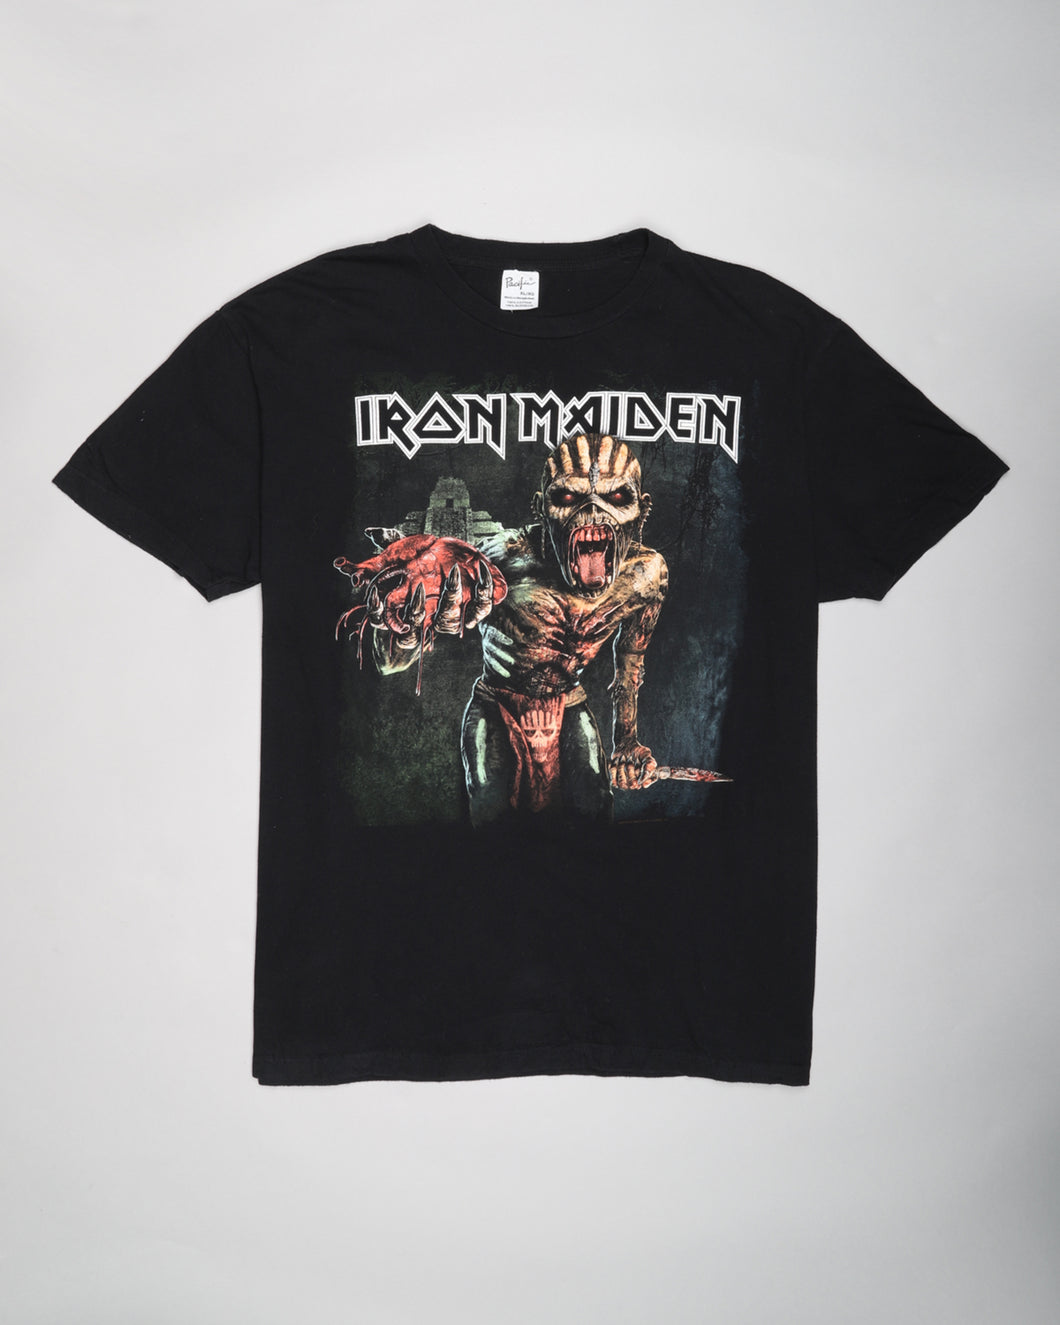 Black Iron Maiden short sleeved casual fit t-shirt